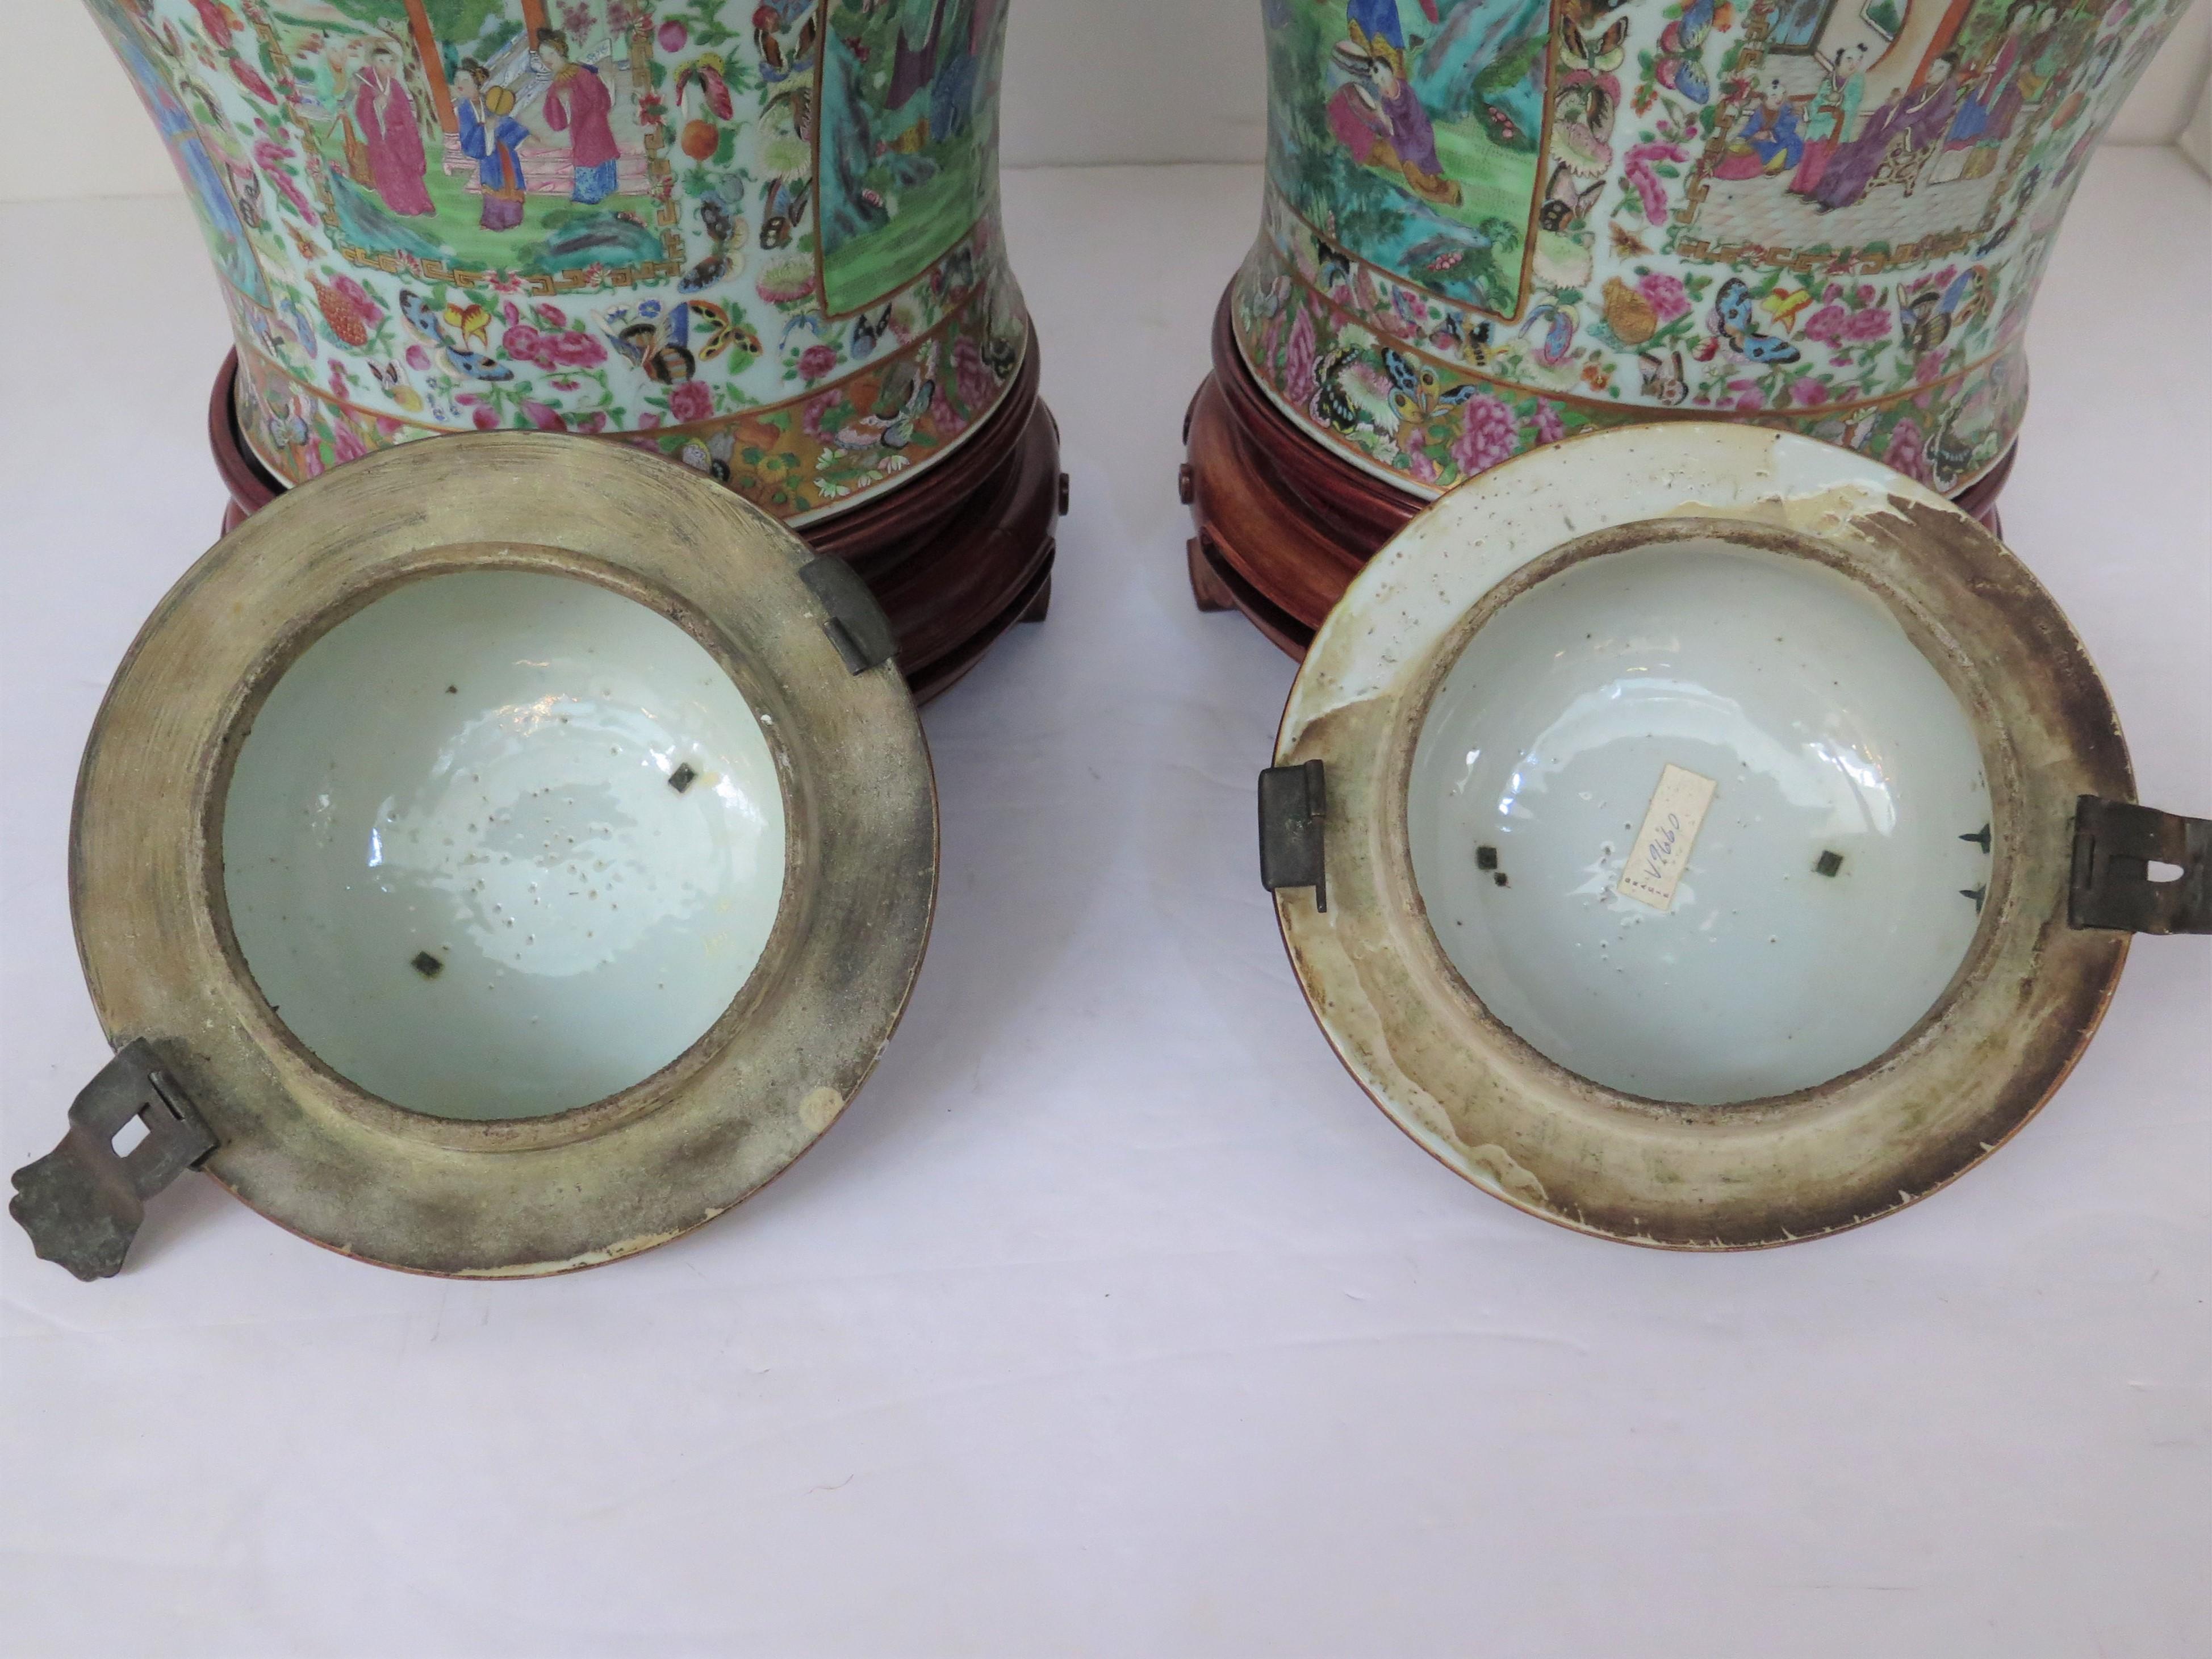 A Pair of Late 18th-Early 19th Century Chinese Lidded Jars  For Sale 3